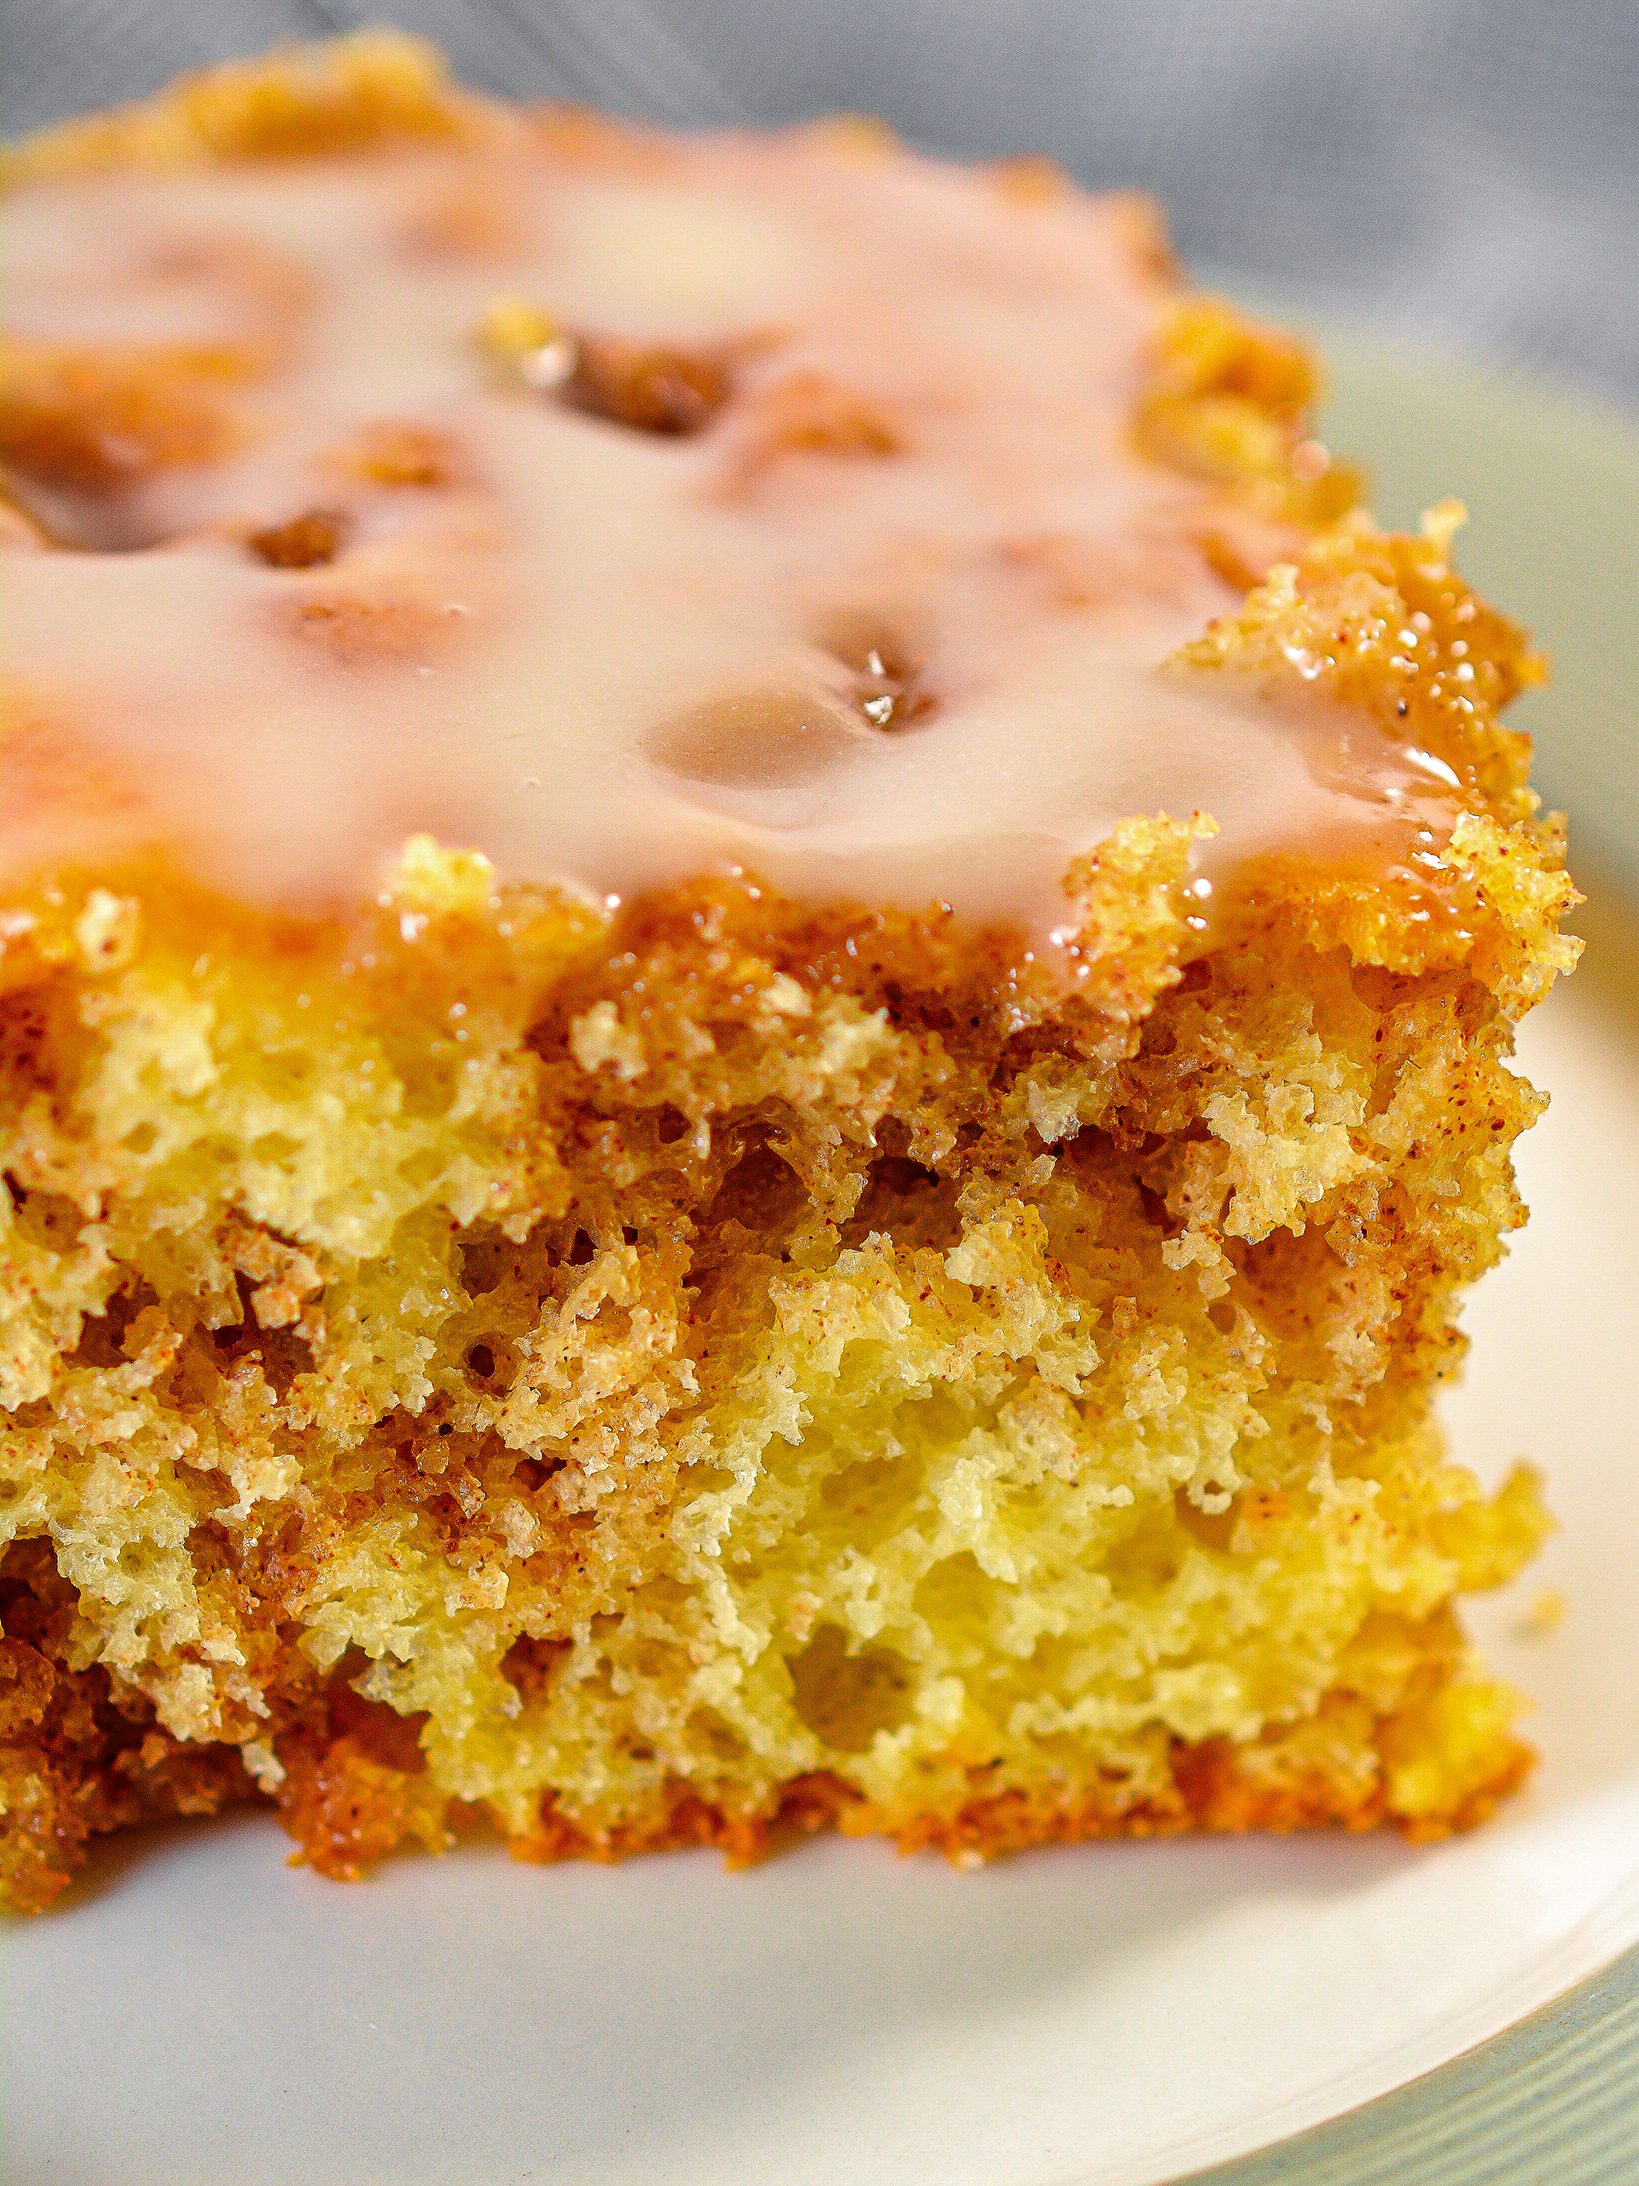 honey bun cake, honey bun cake recipe, honey bun cake from scratch